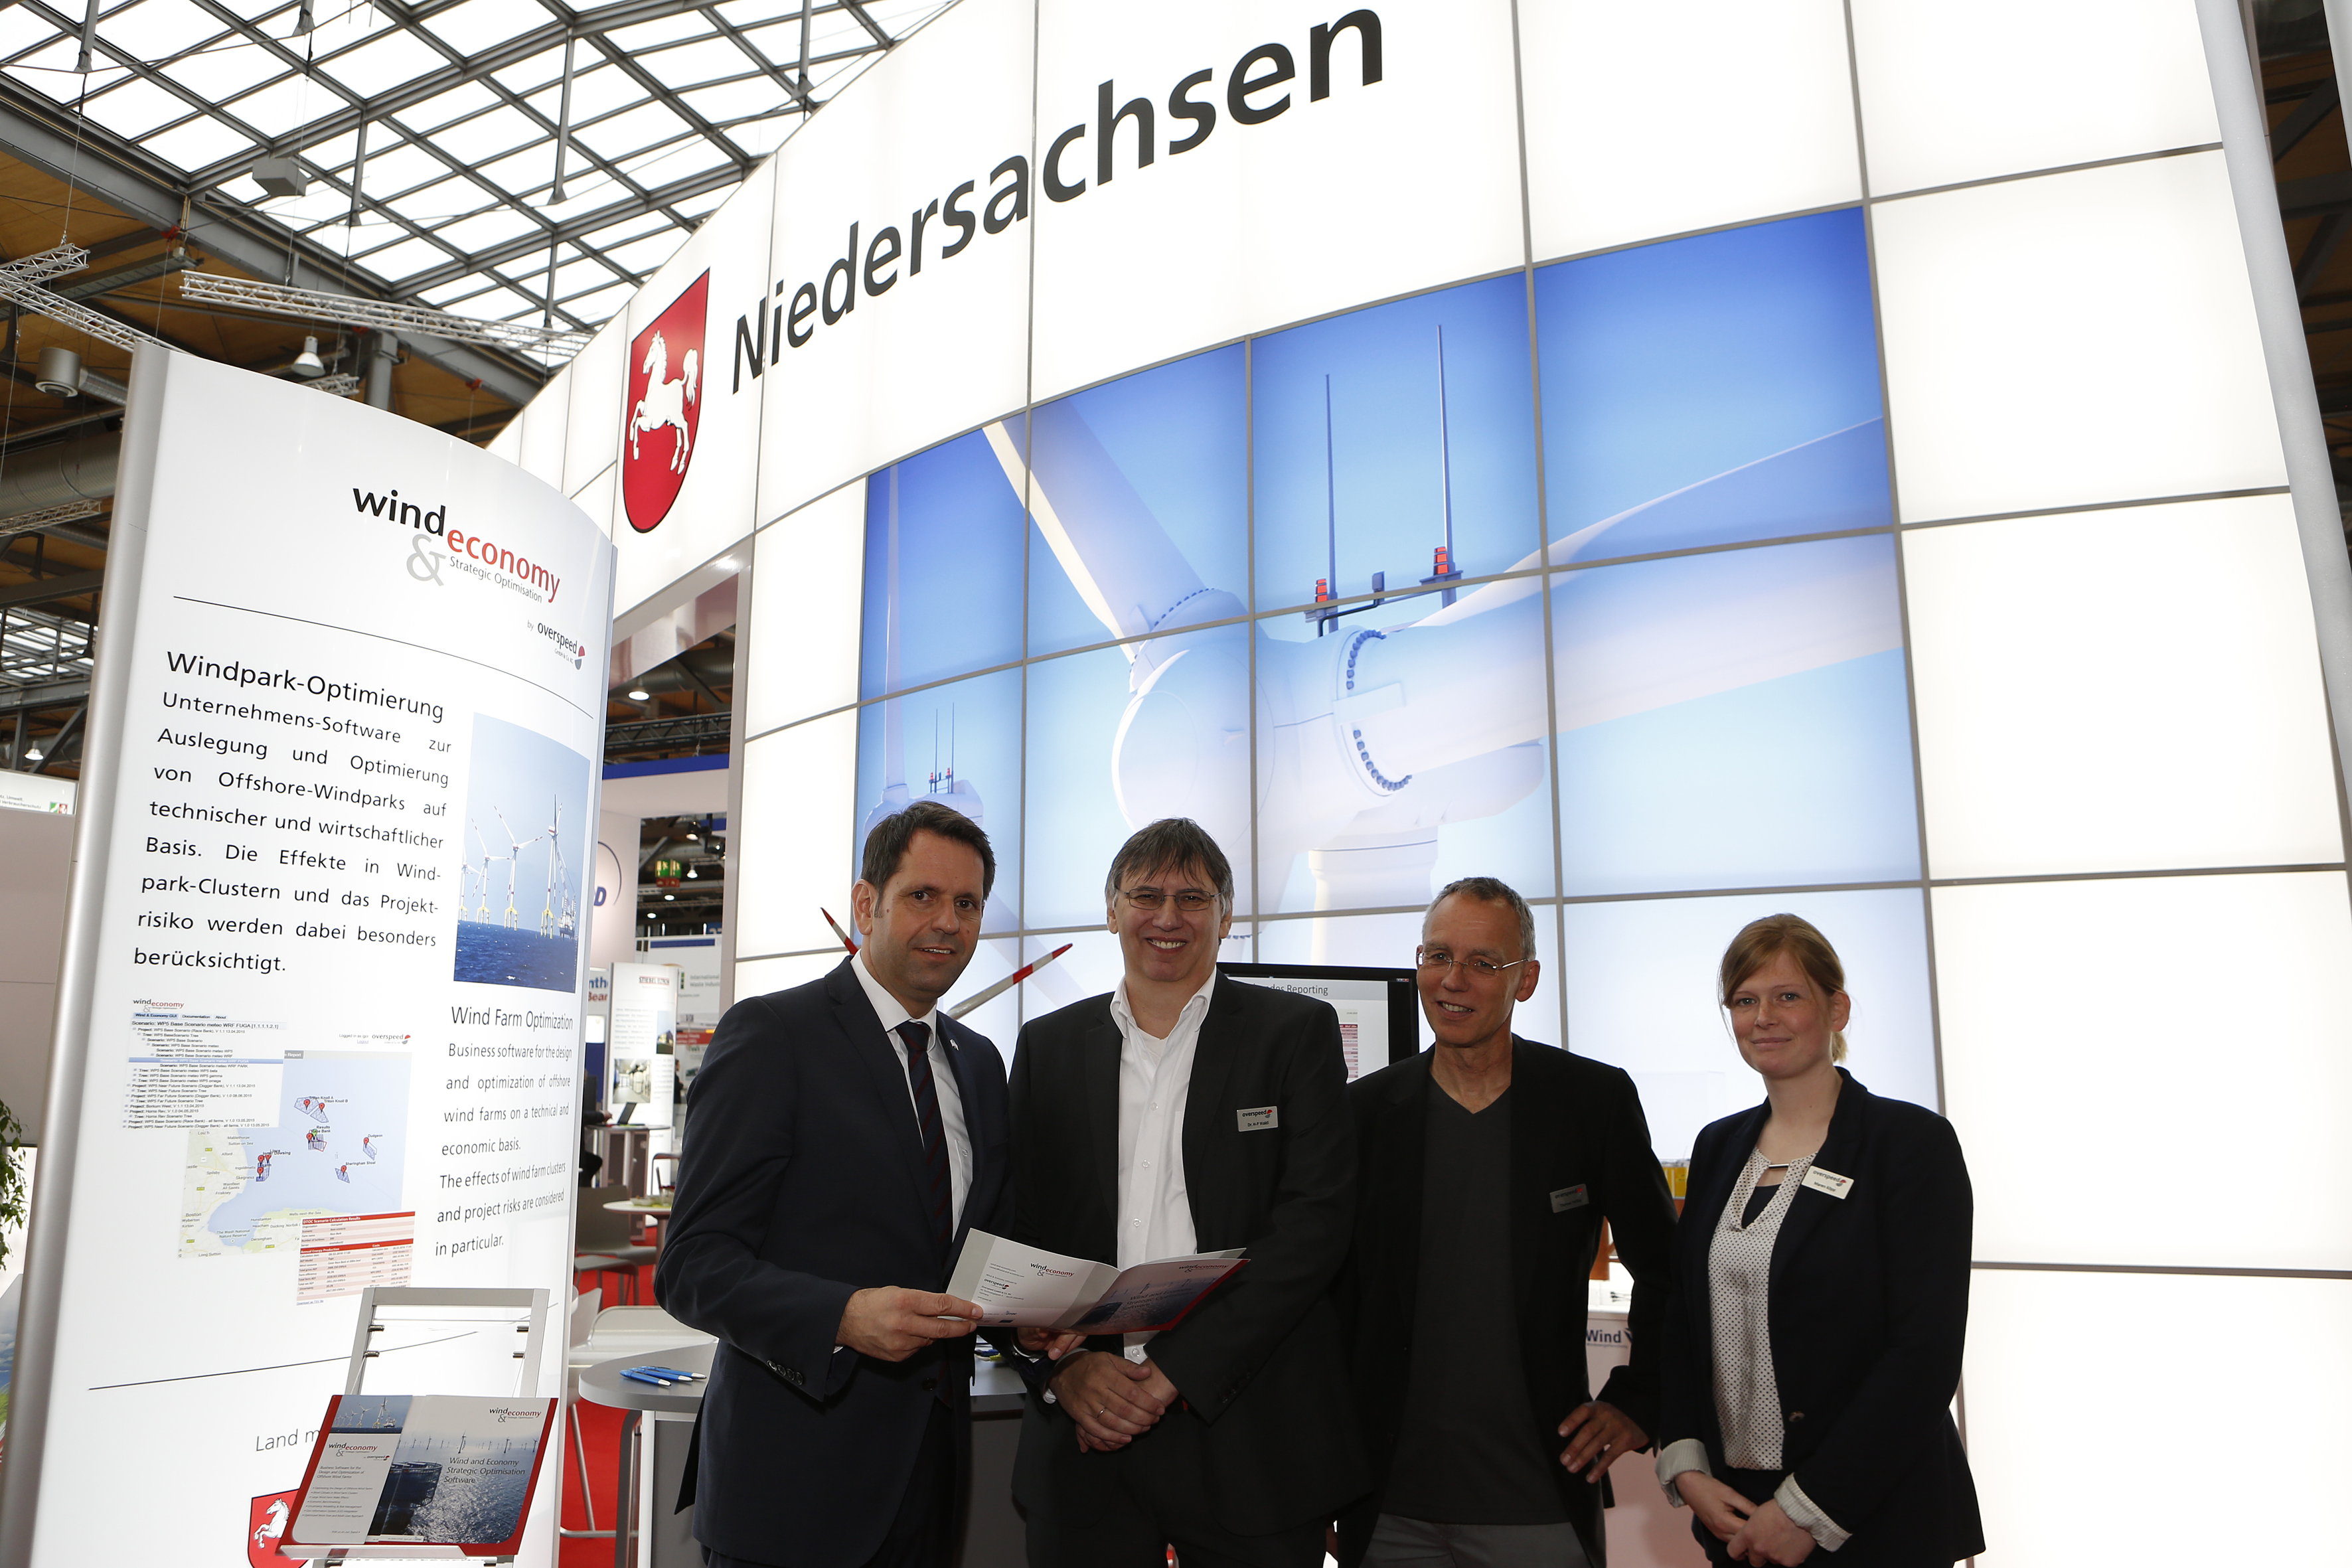 Hannover Messe 2016: Lower Saxony Economic Minister Olaf Lies, Overspeed Managing Directors Dr. Hans-Peter (Igor) Waldl and Thomas Pahlke, Project Manager Maren Köpp. (c) innos Sperlich GmbH